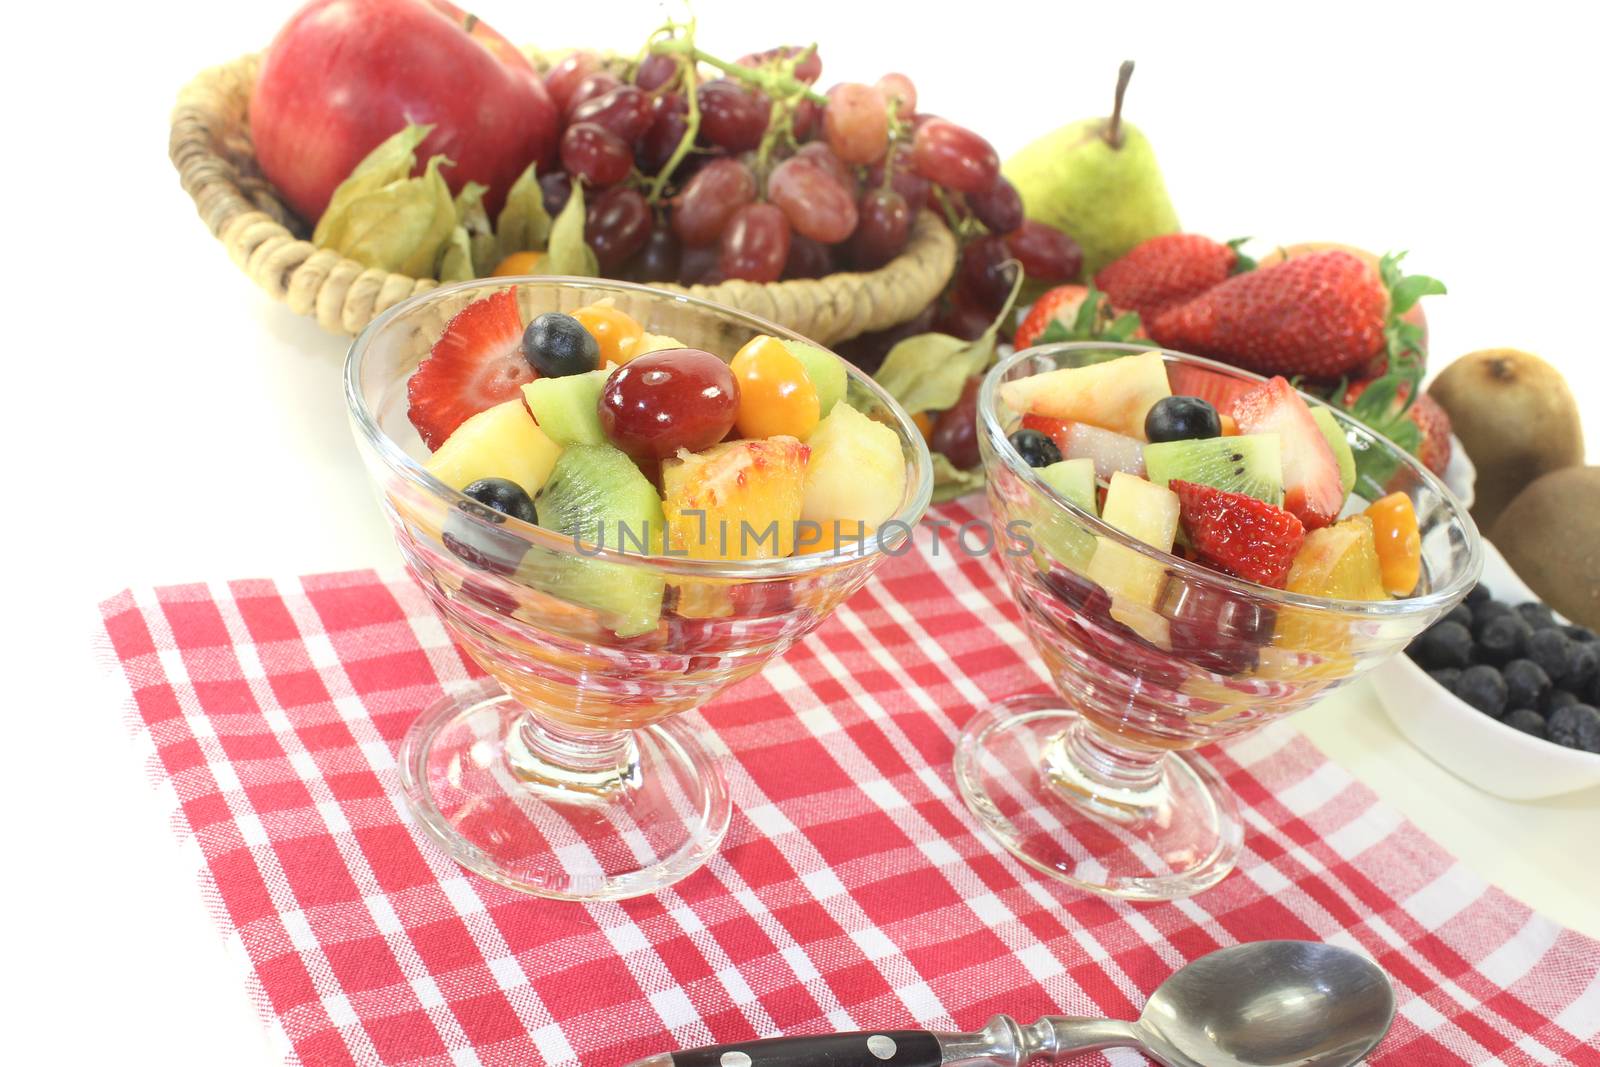 Fruit salad in a bowl on checkered napkin before light background